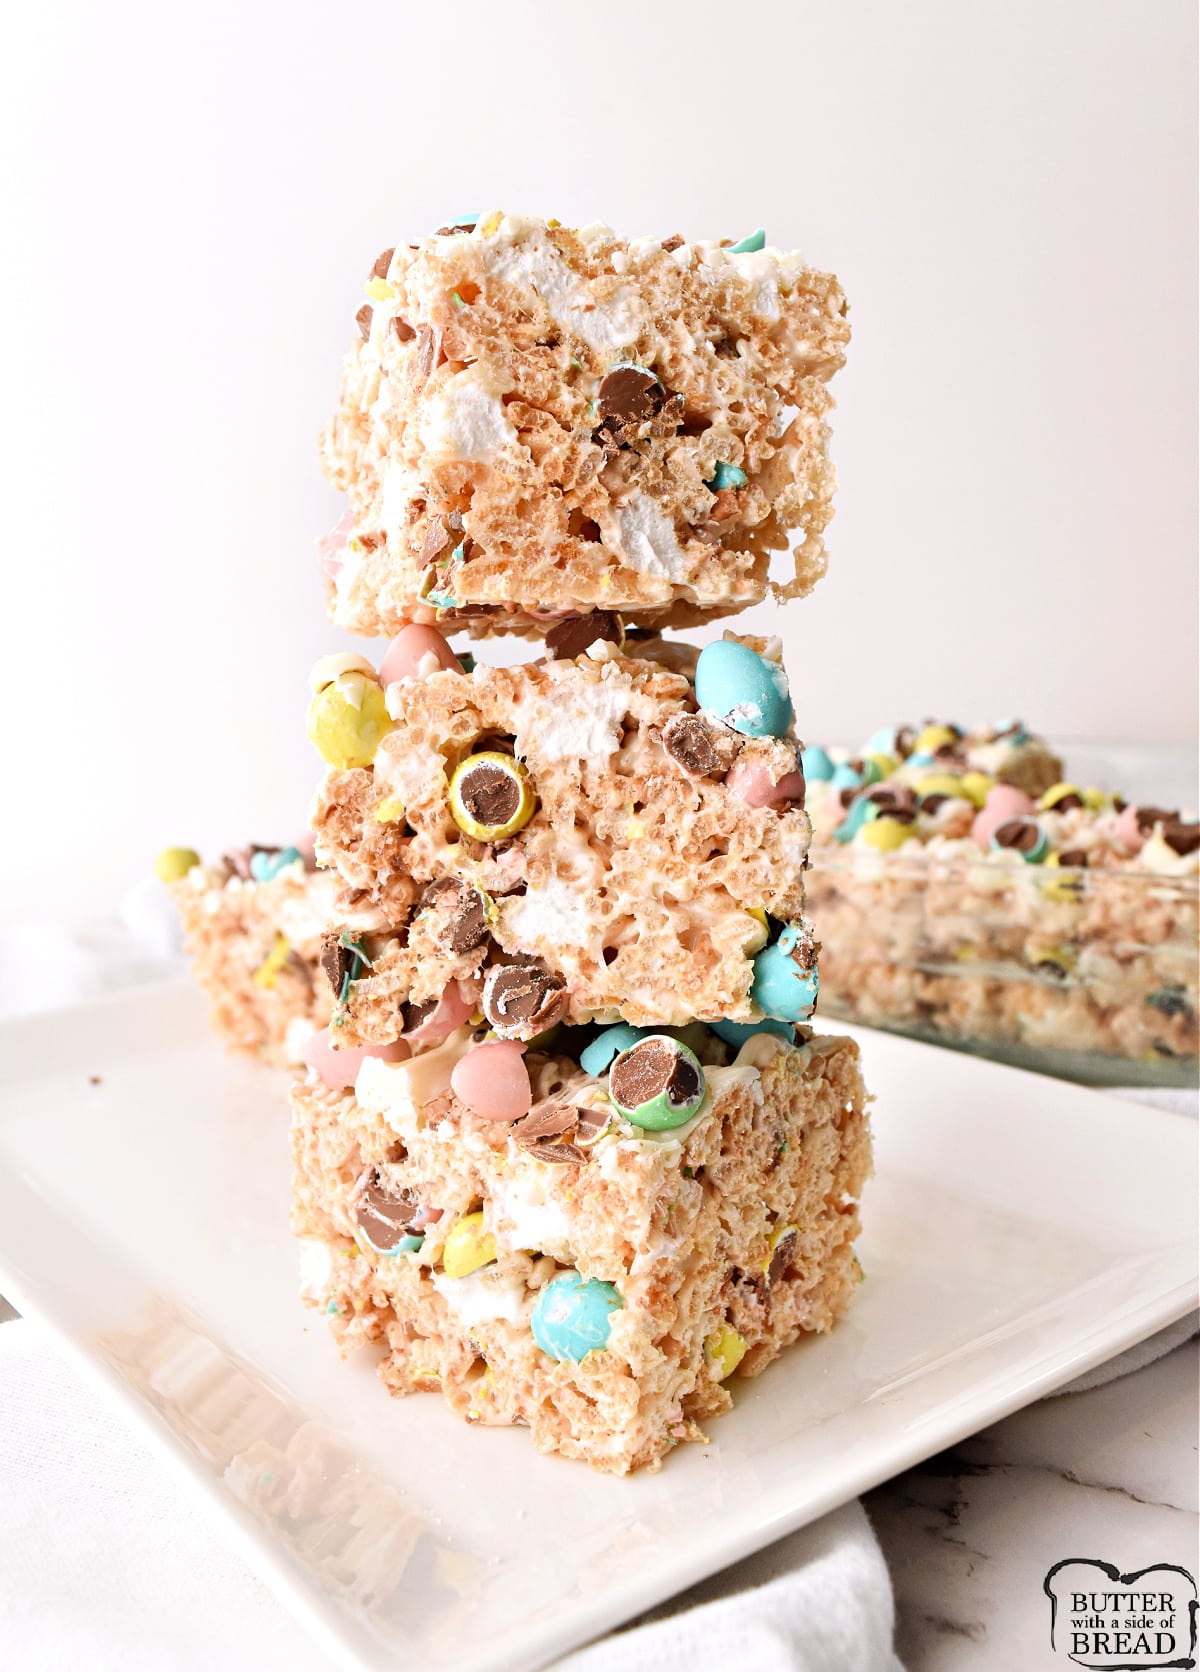 Mini Egg Rice Krispie Treats made with crispy rice cereal, marshmallows, crushed Cadbury mini eggs and topped with a white chocolate drizzle. Rice Krispie Treat recipe that is perfect for Easter and springtime!